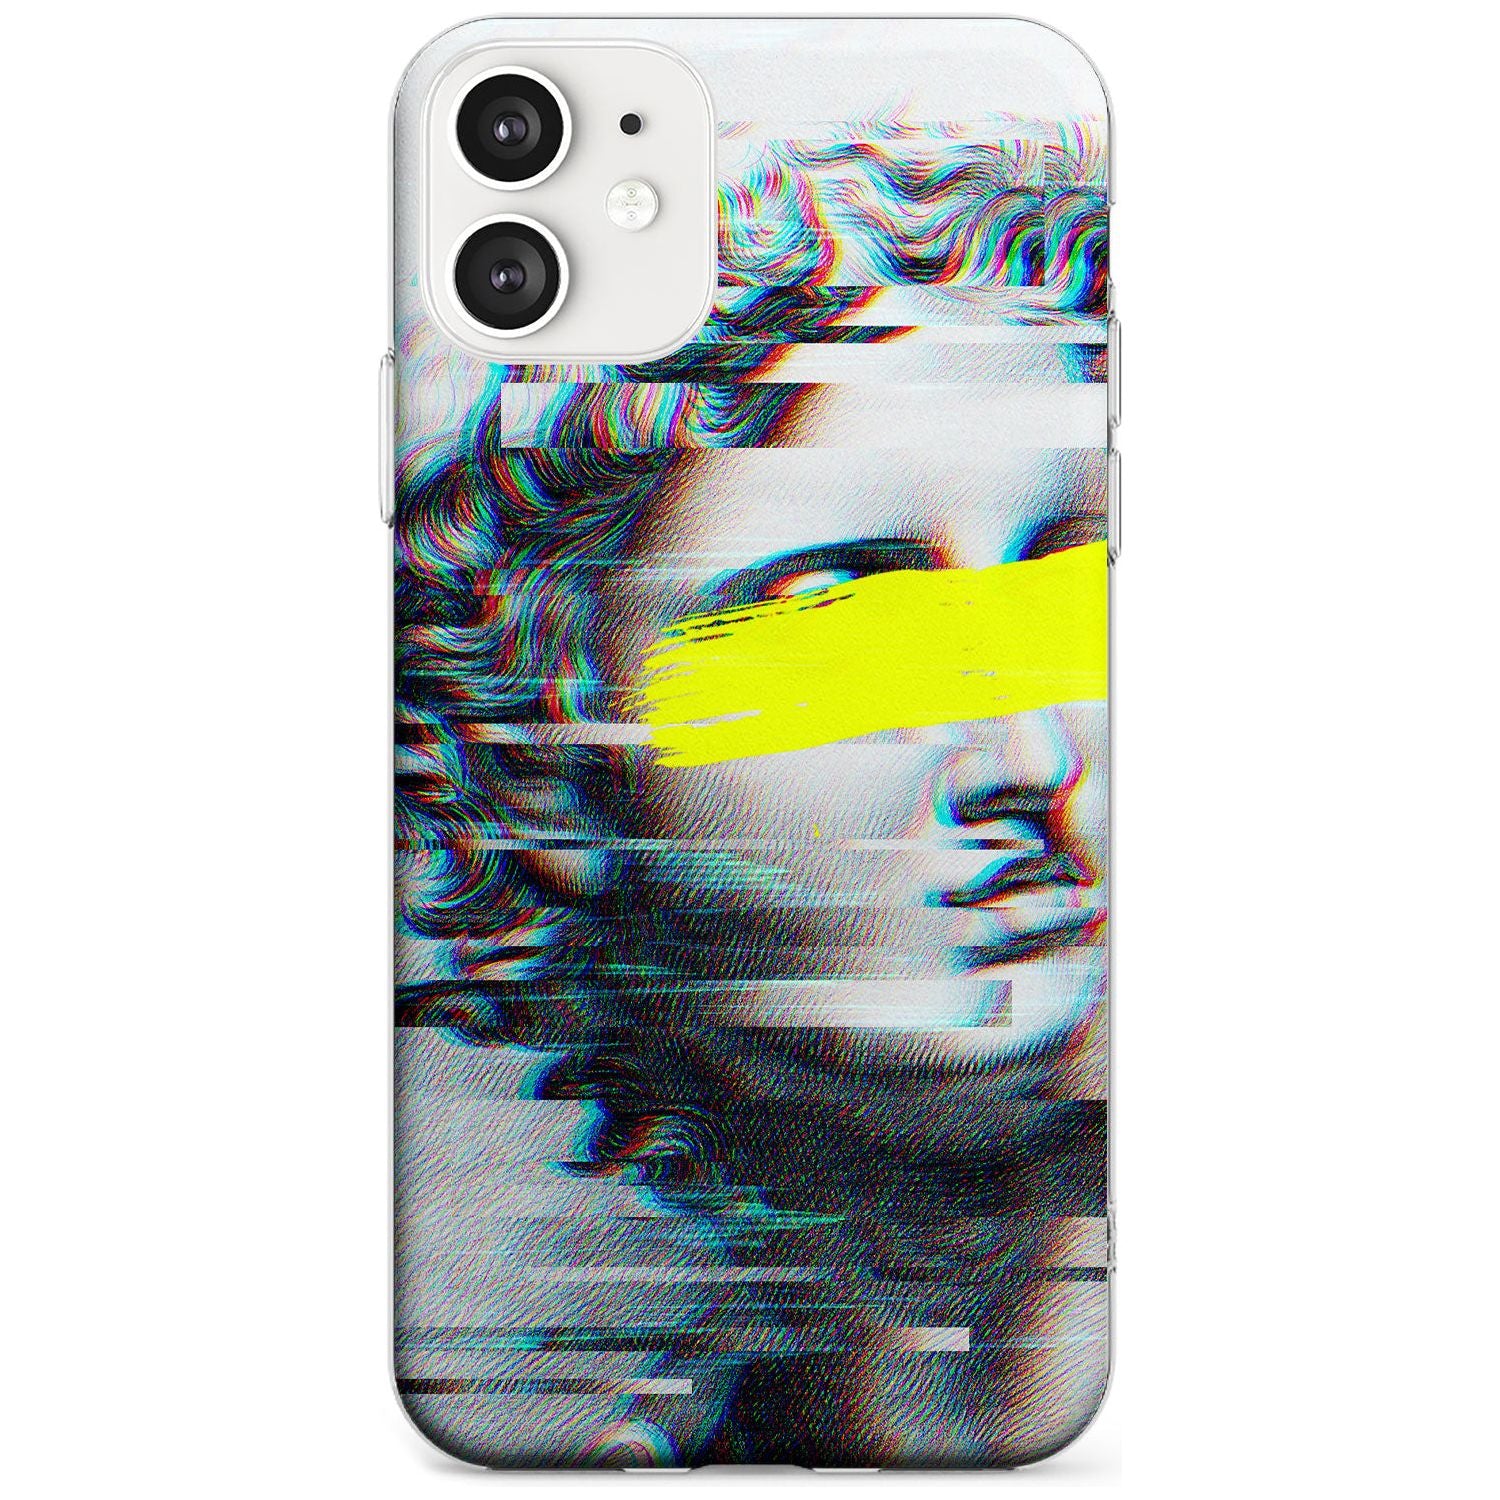 GLITCHED FRAGMENT Black Impact Phone Case for iPhone 11